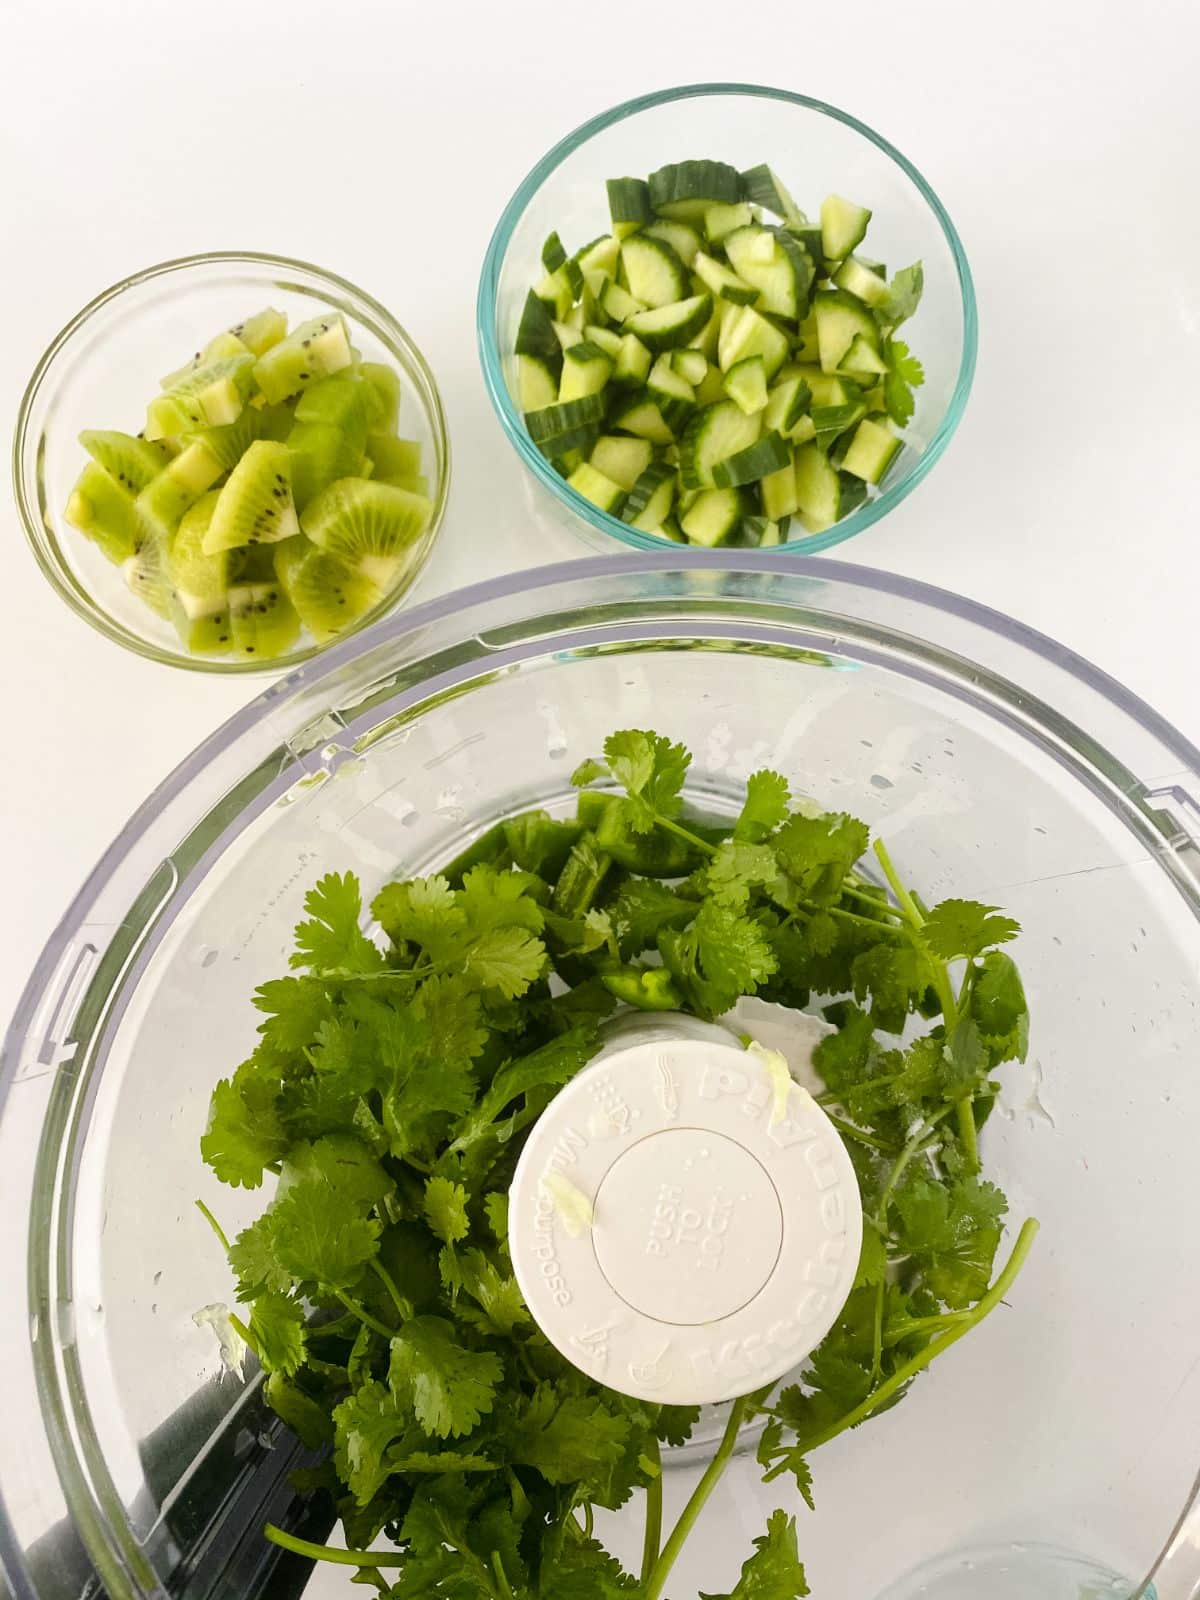 cilantro in food processor with bowls of cucumber on side